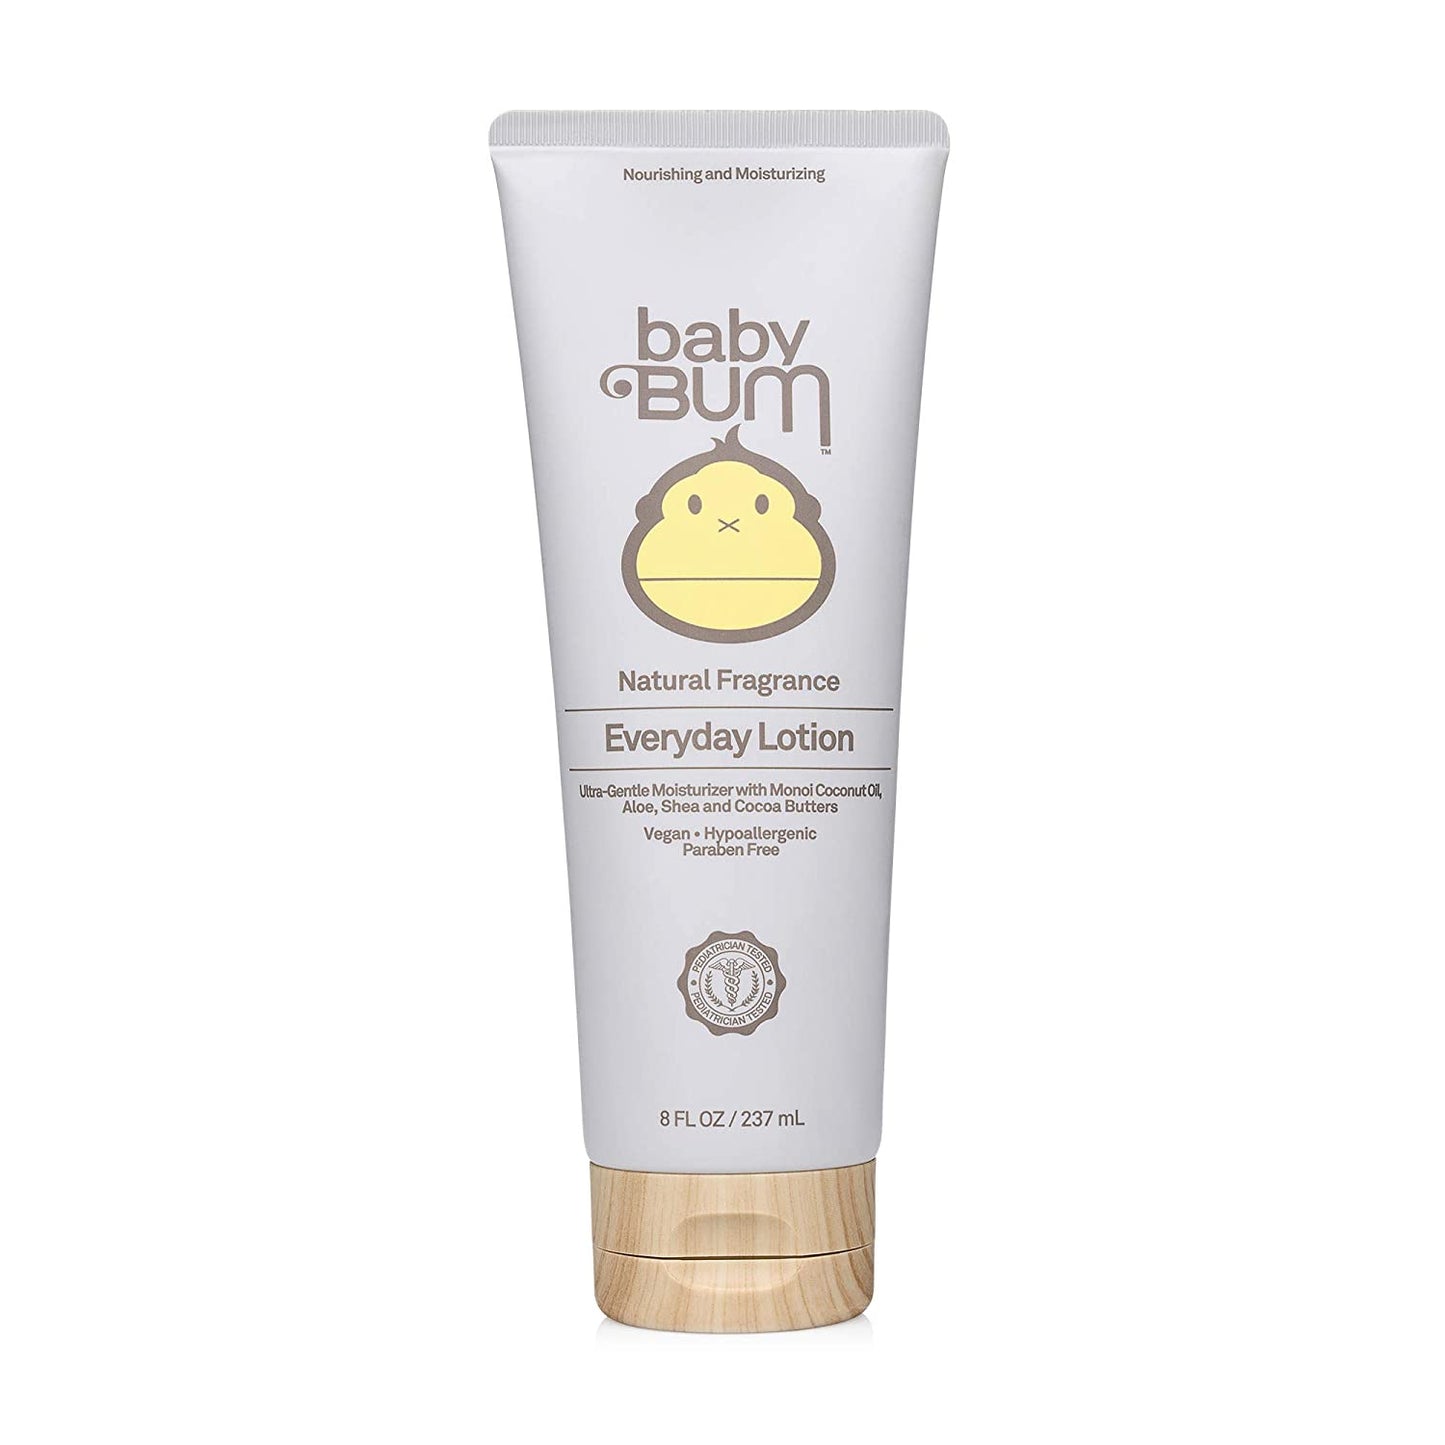 Baby Bum everyday lotion natural fragrance 237ml